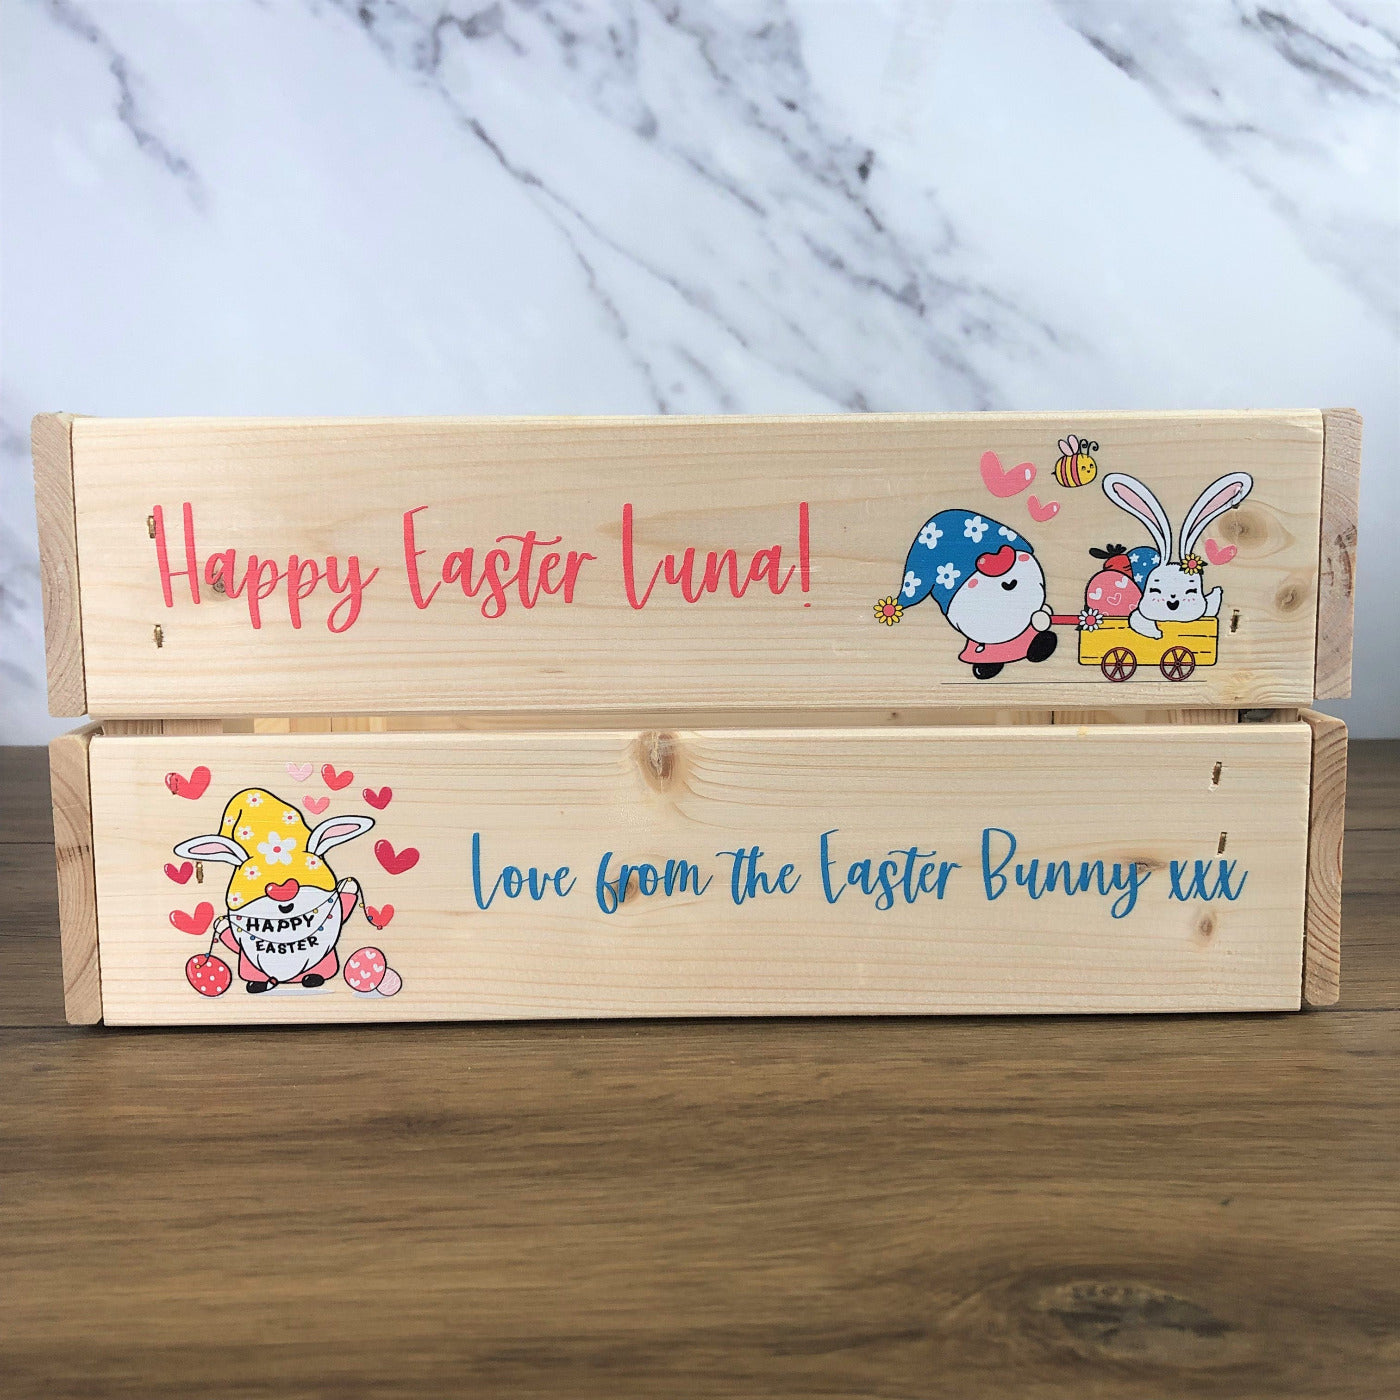 Personalised Solid Pine Flat Pack Slatted Crate - Happy Easter